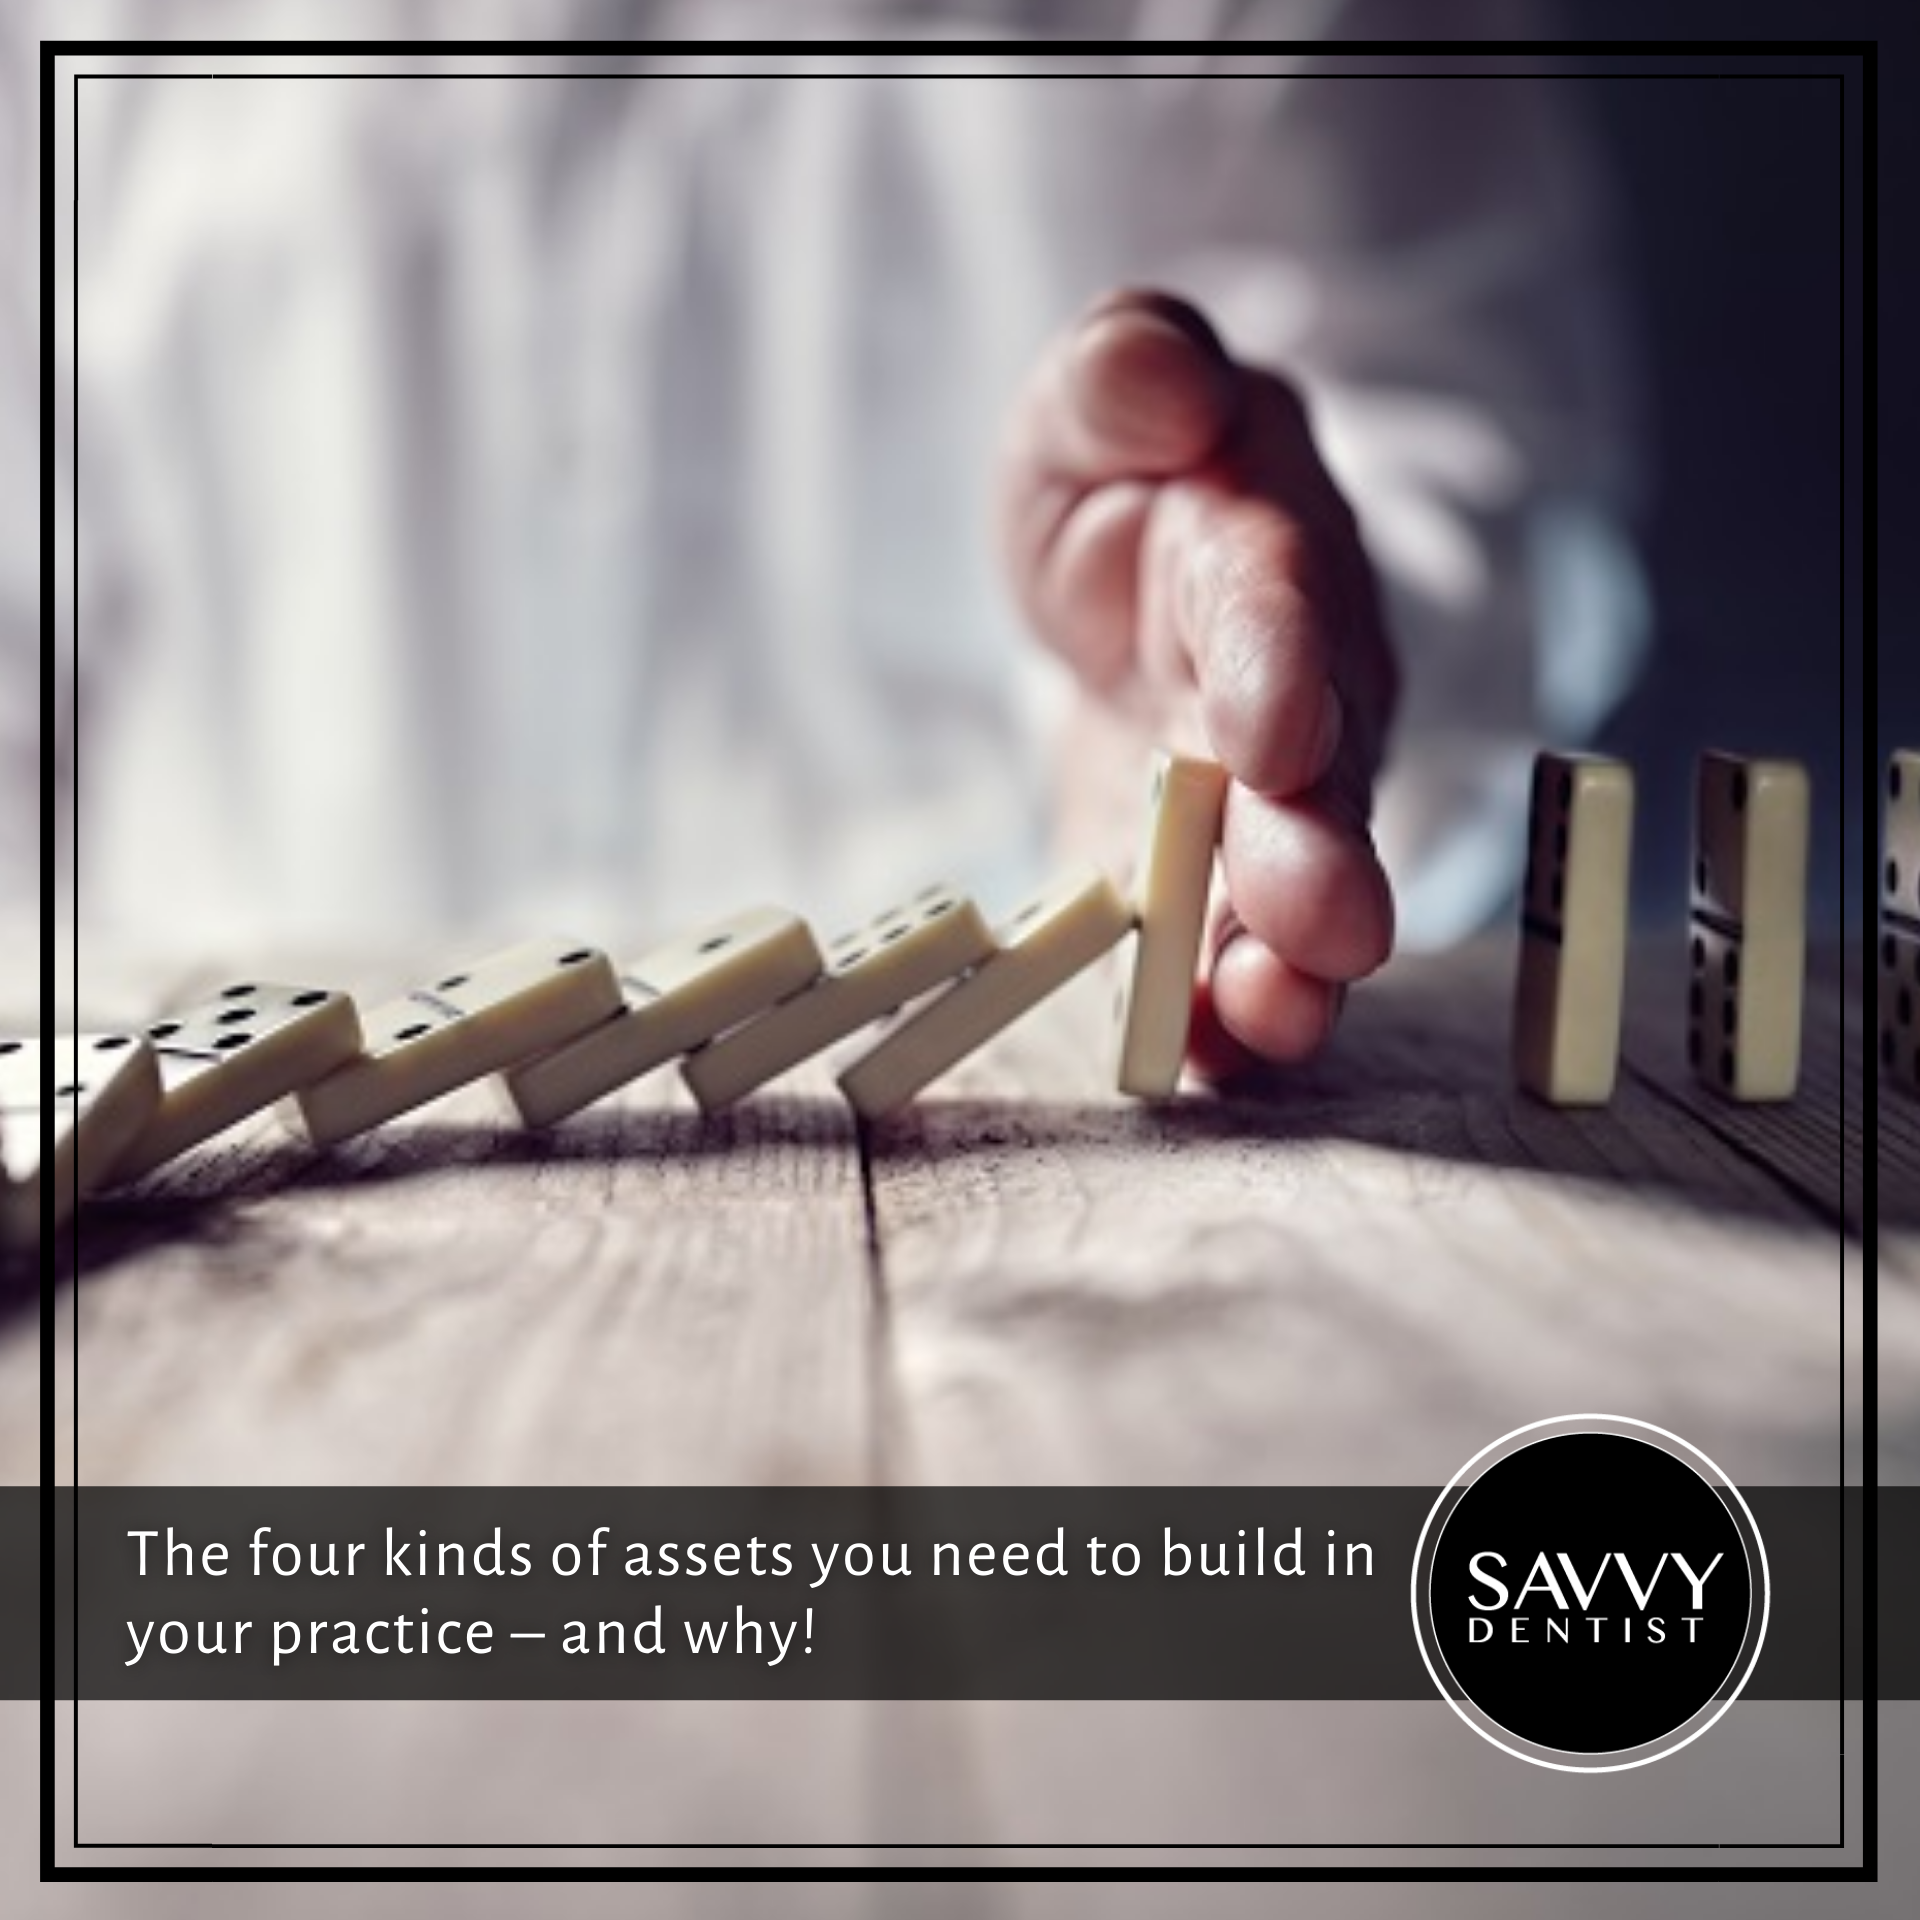 The four kinds of assets you need to build in your practice – and why!